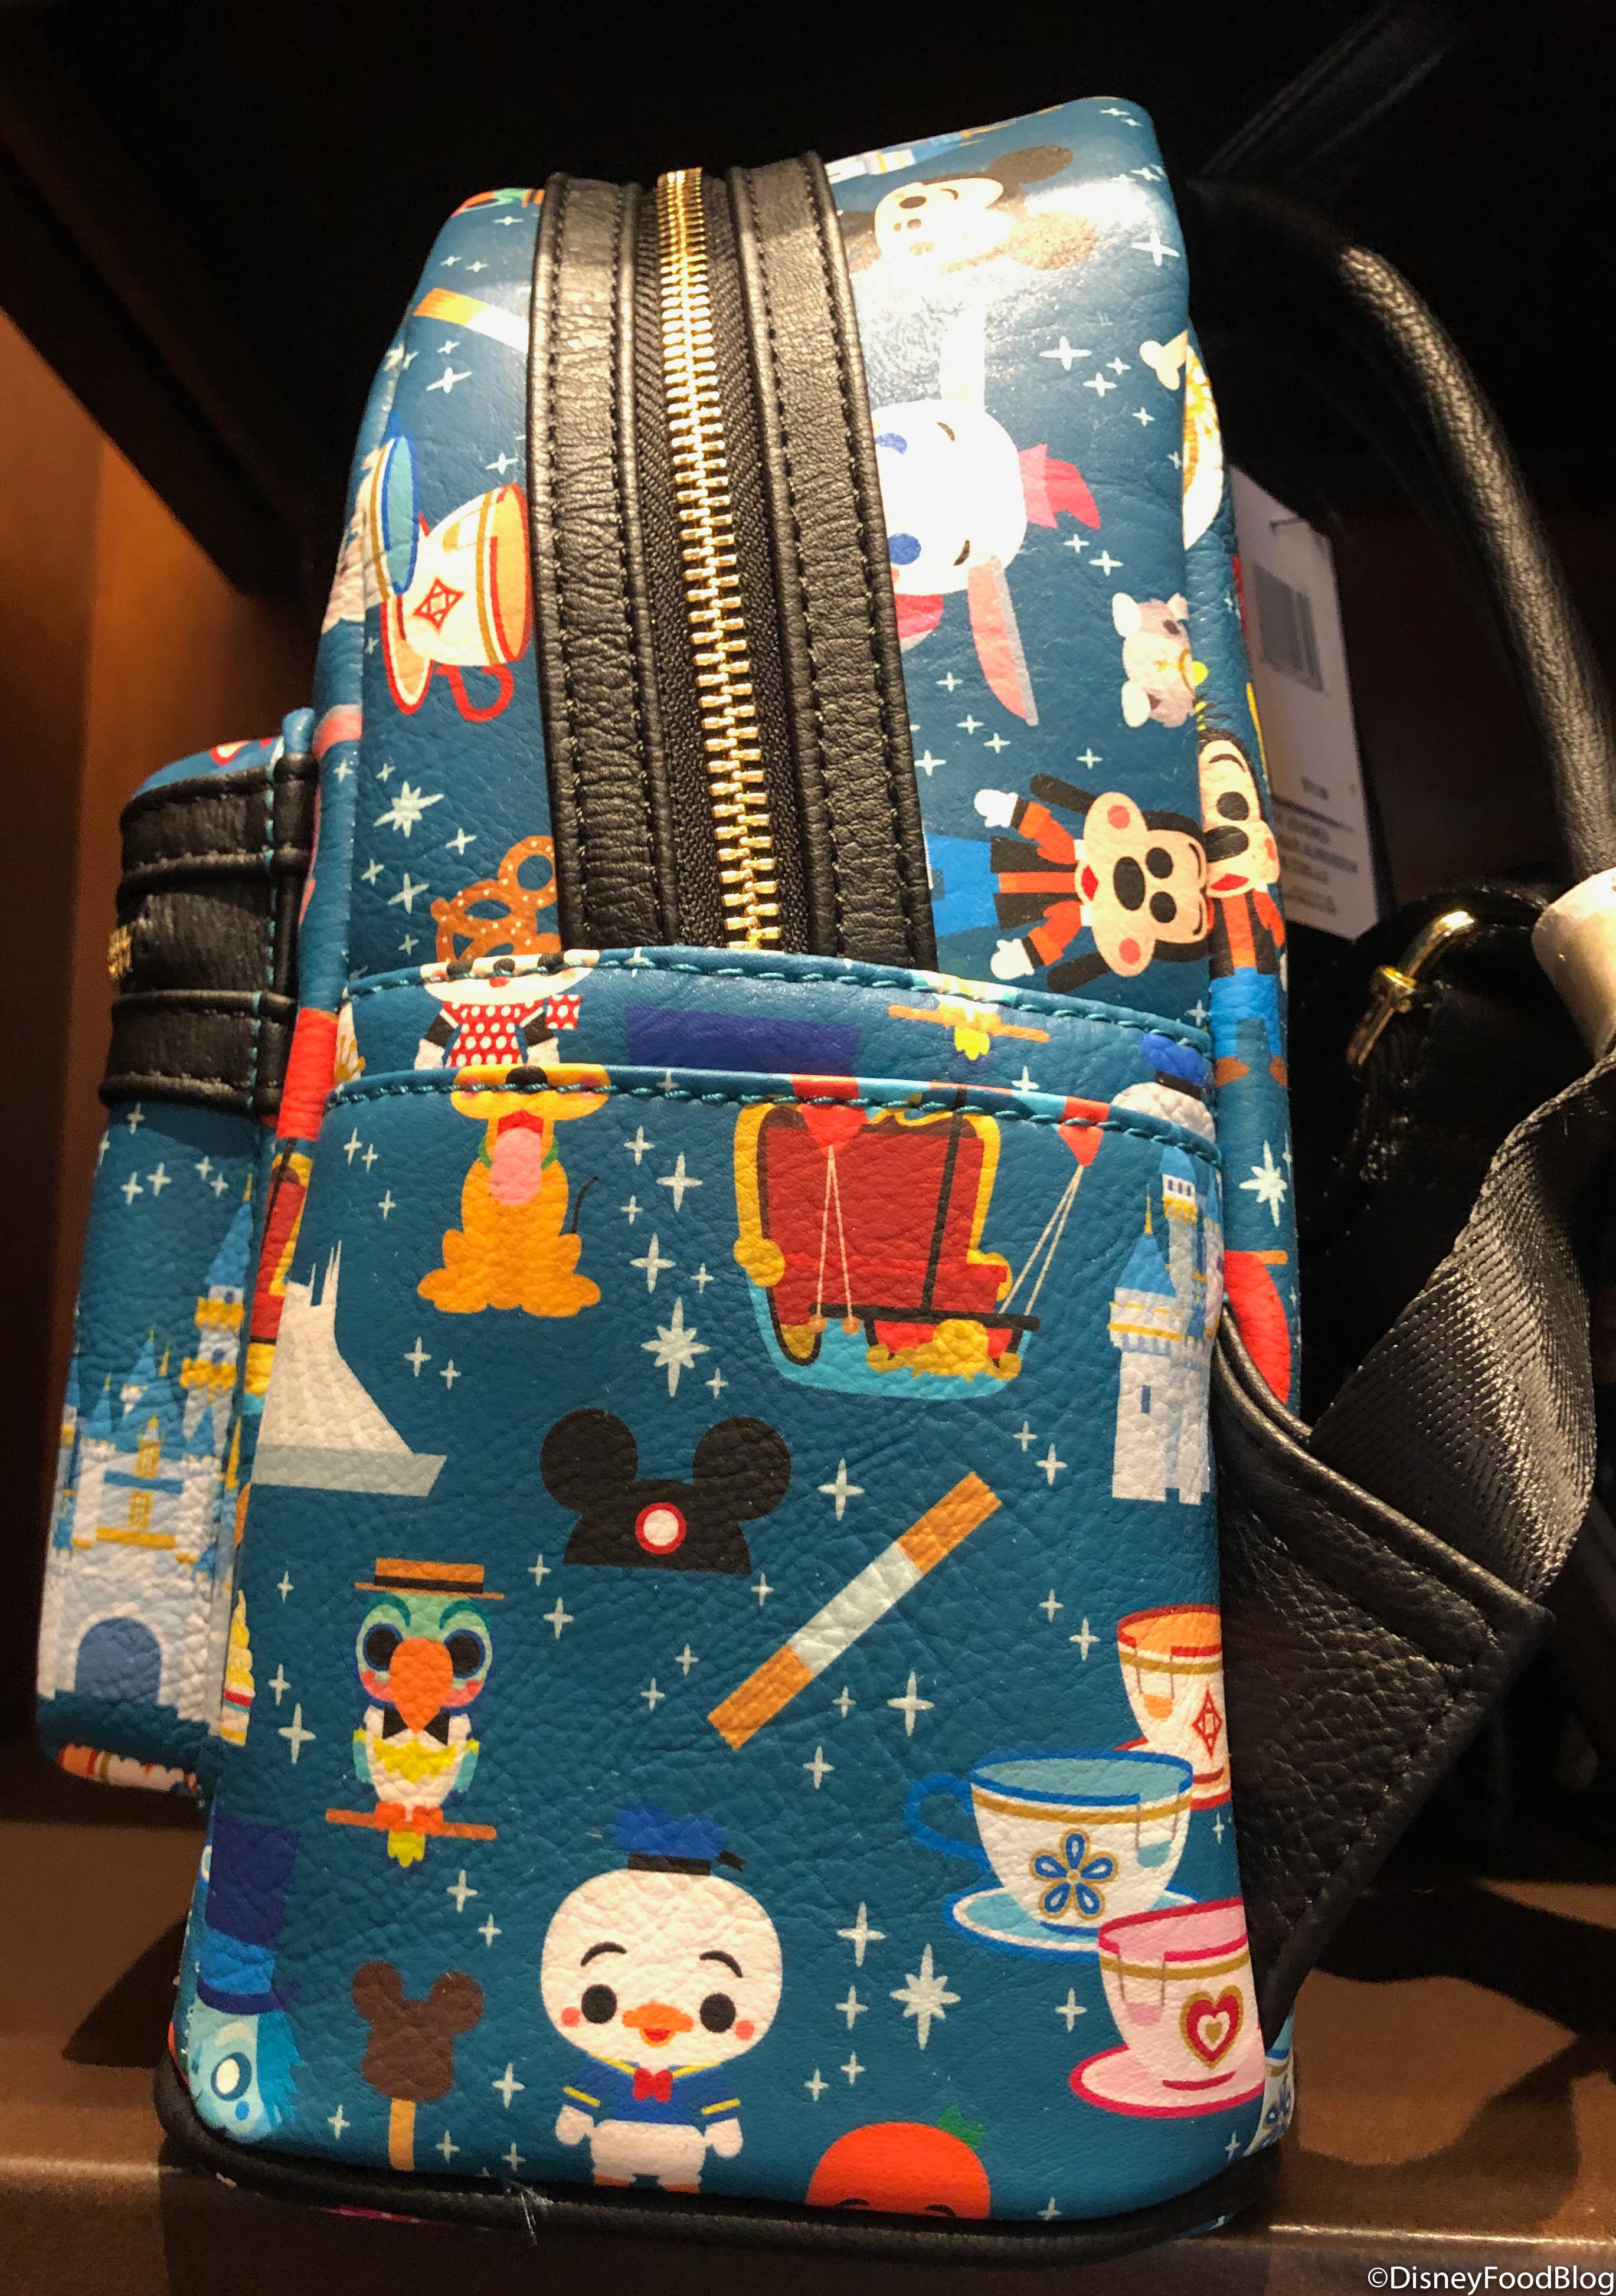 Disney Parks attractions Minis Mini Backpack Purse by Loungefly